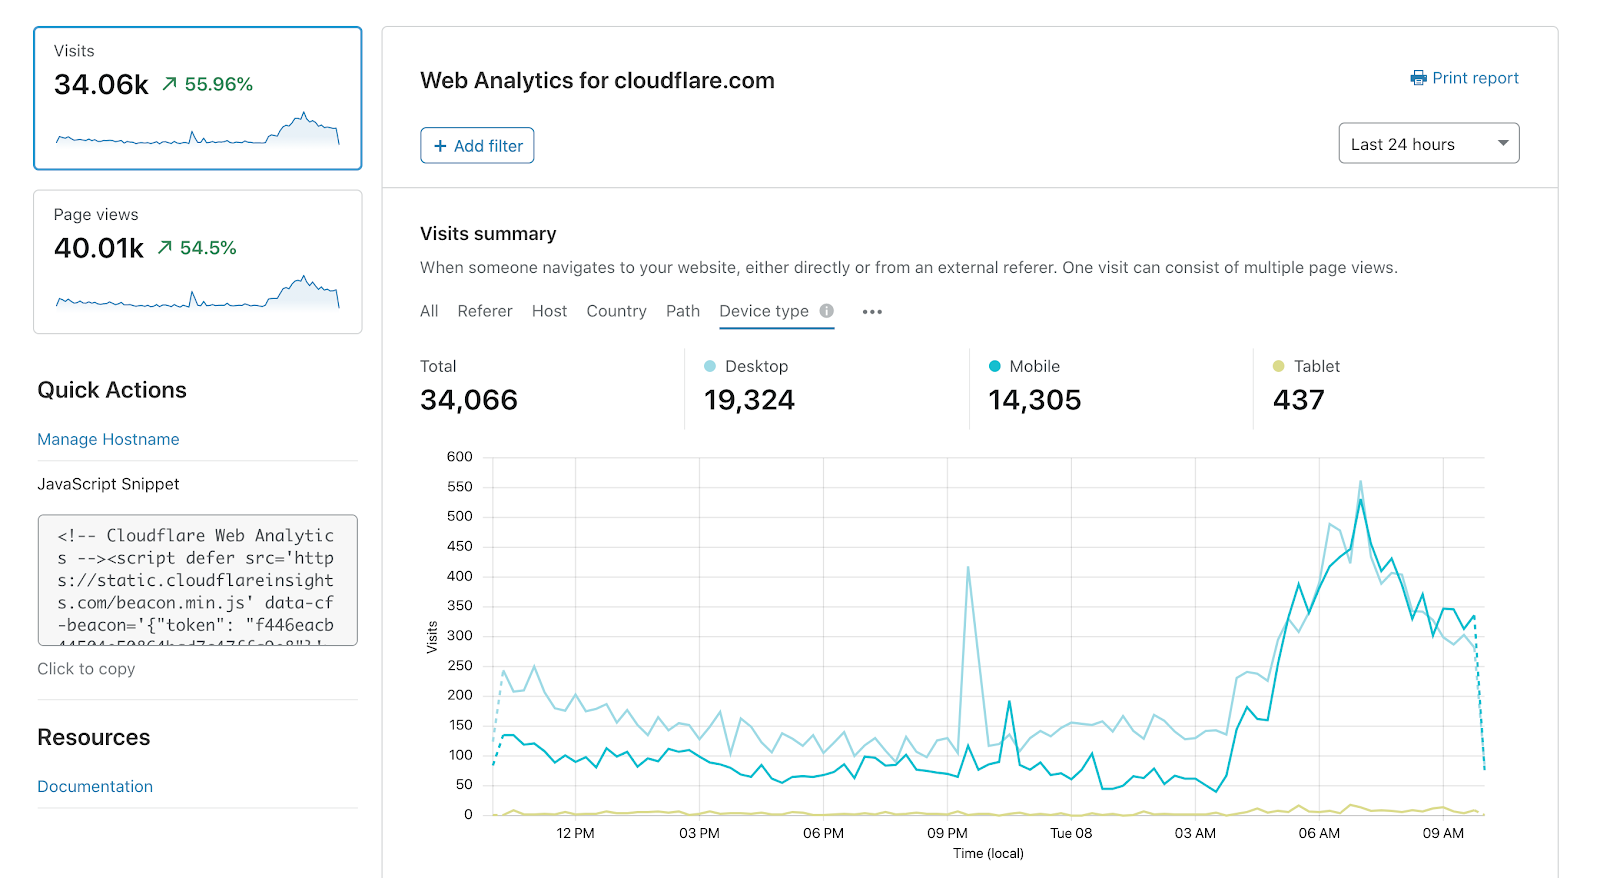 Cloudflare has released its website analytics system